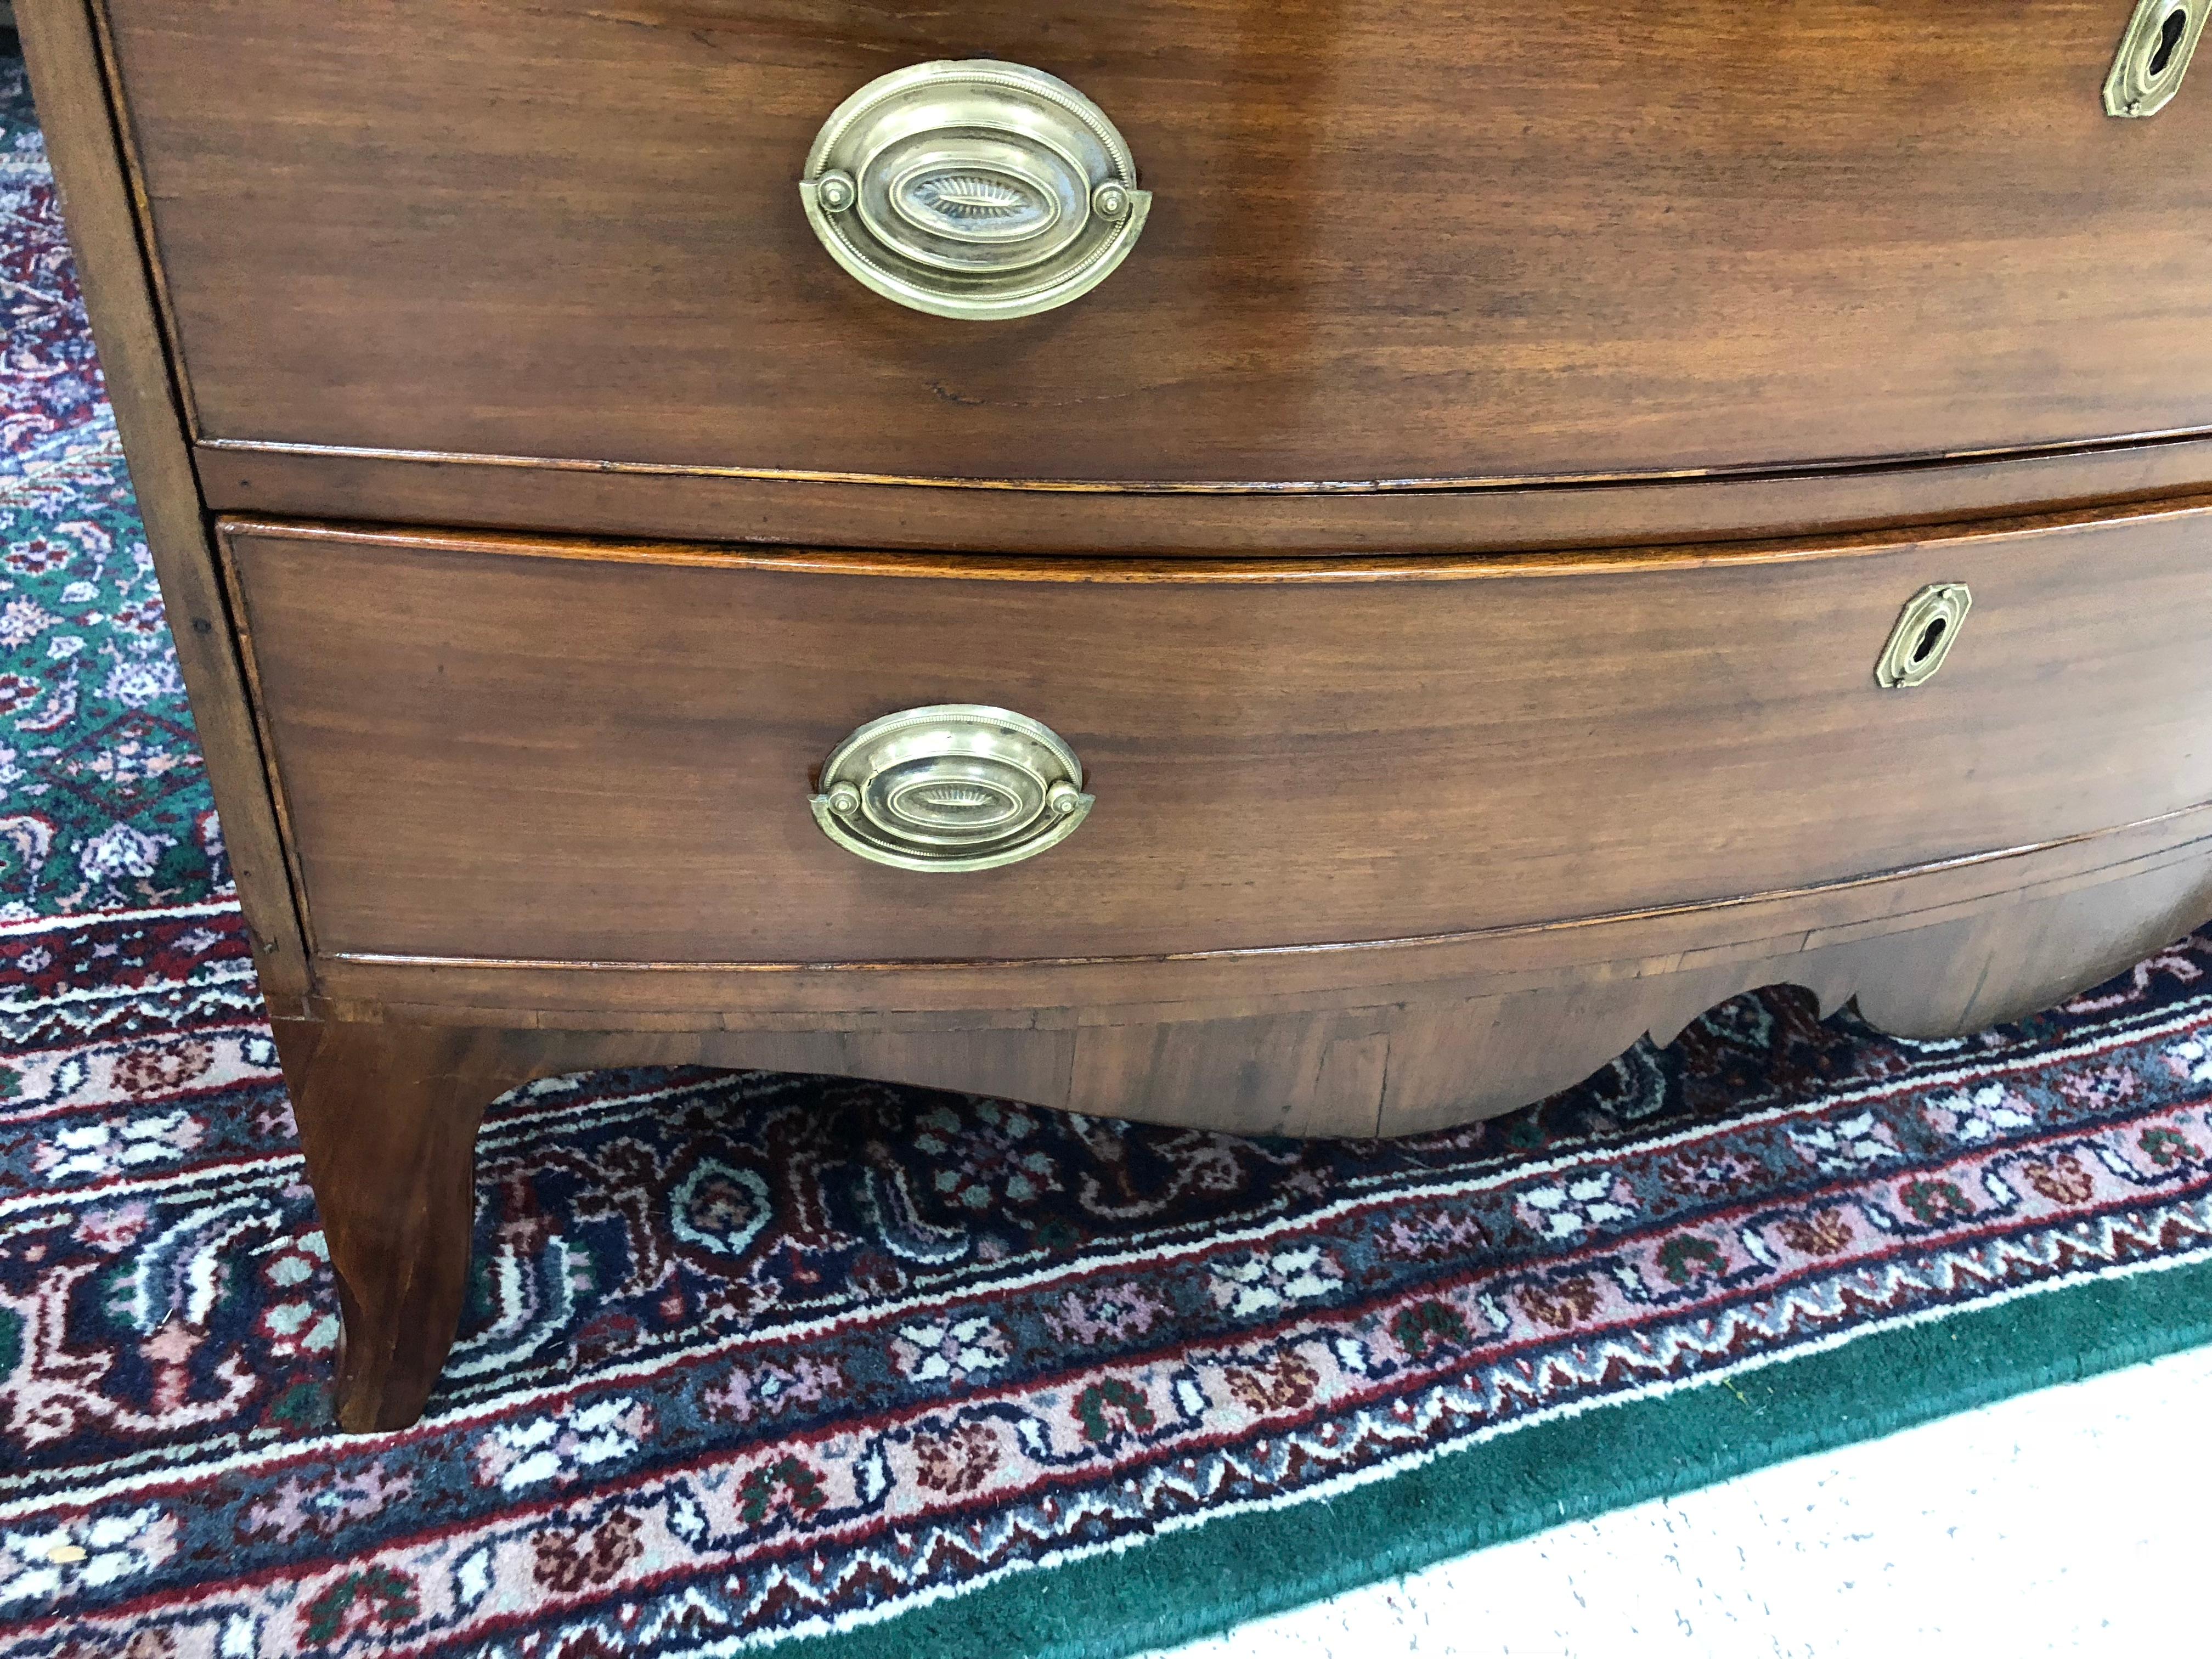 19th Century American Federal Bow Front Chest, Mahogany and Cherry, Exceptional Color